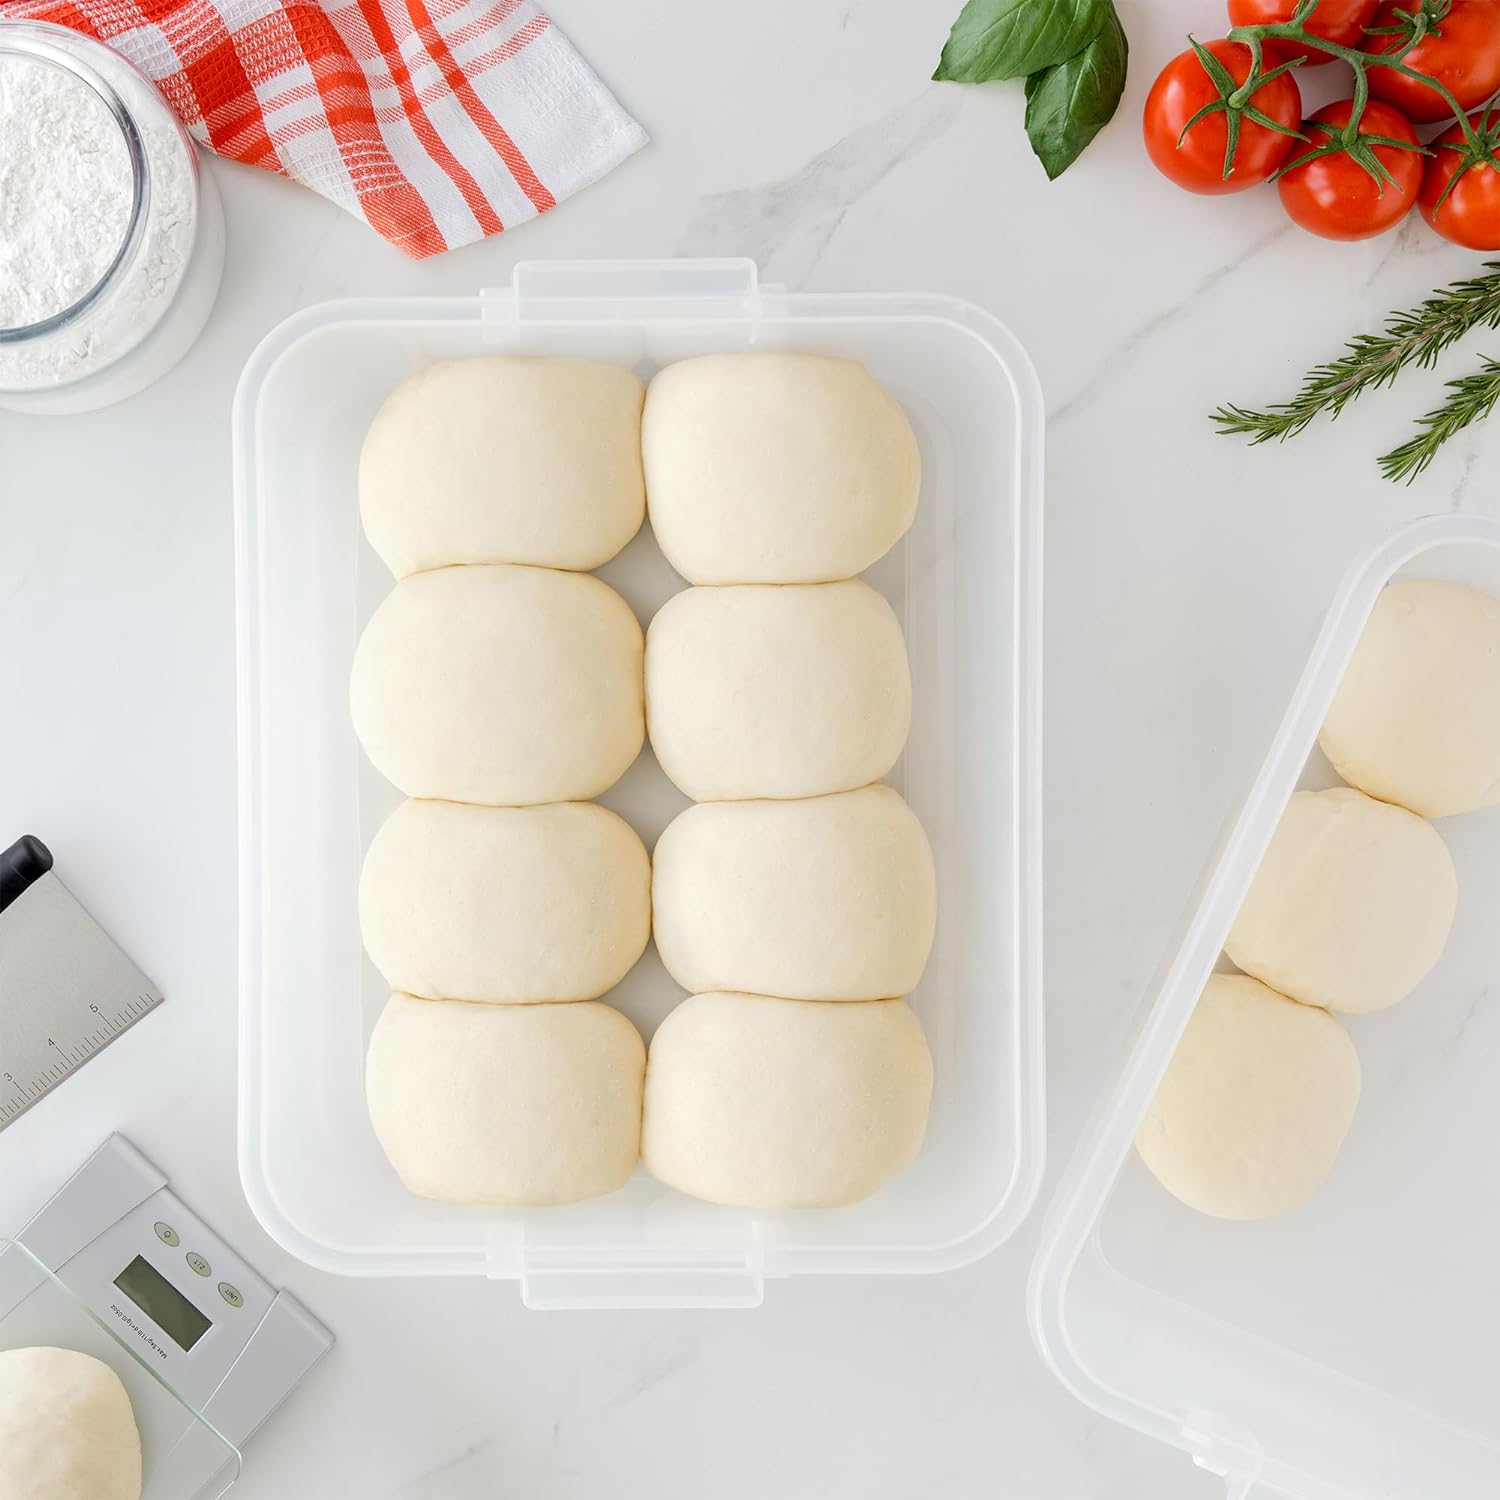 Large Pizza Dough Proofing Box Kit 2-Pack, 17 x 13-Inch, Fits 6-8 Dough Balls (Grey)